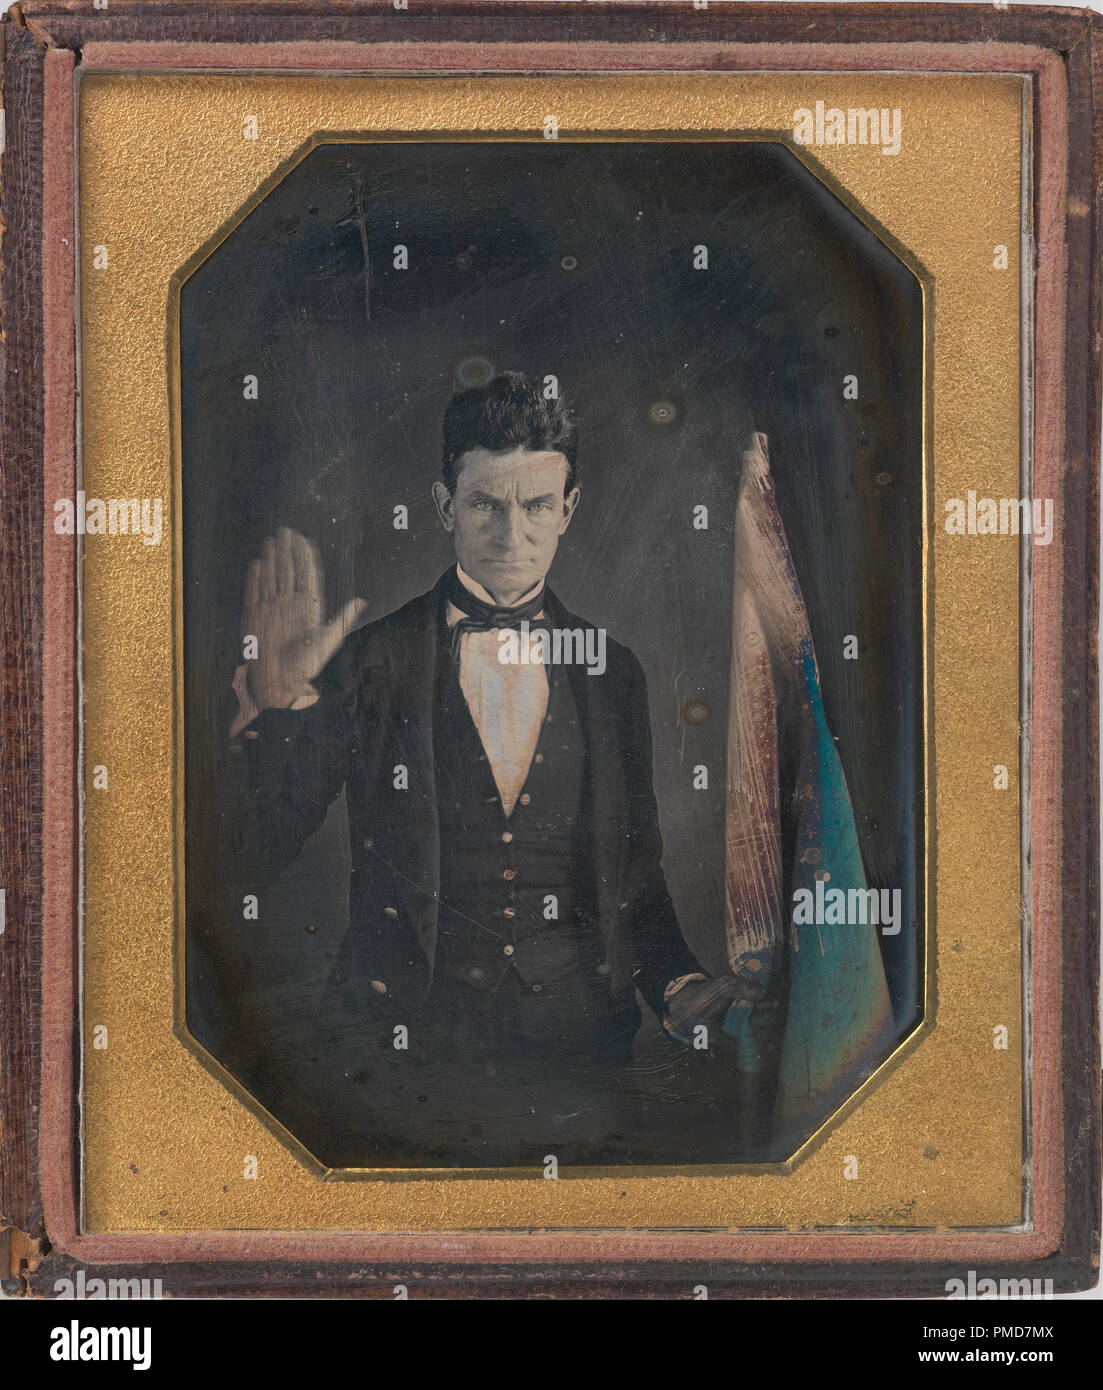 John Brown. Date/Period: Ca. 1846-1847. Quarter-plate daguerreotype. Photograph. Height: 114 mm (4.48 in); Width: 197 mm (7.75 in). Author: Augustus Washington. Stock Photo